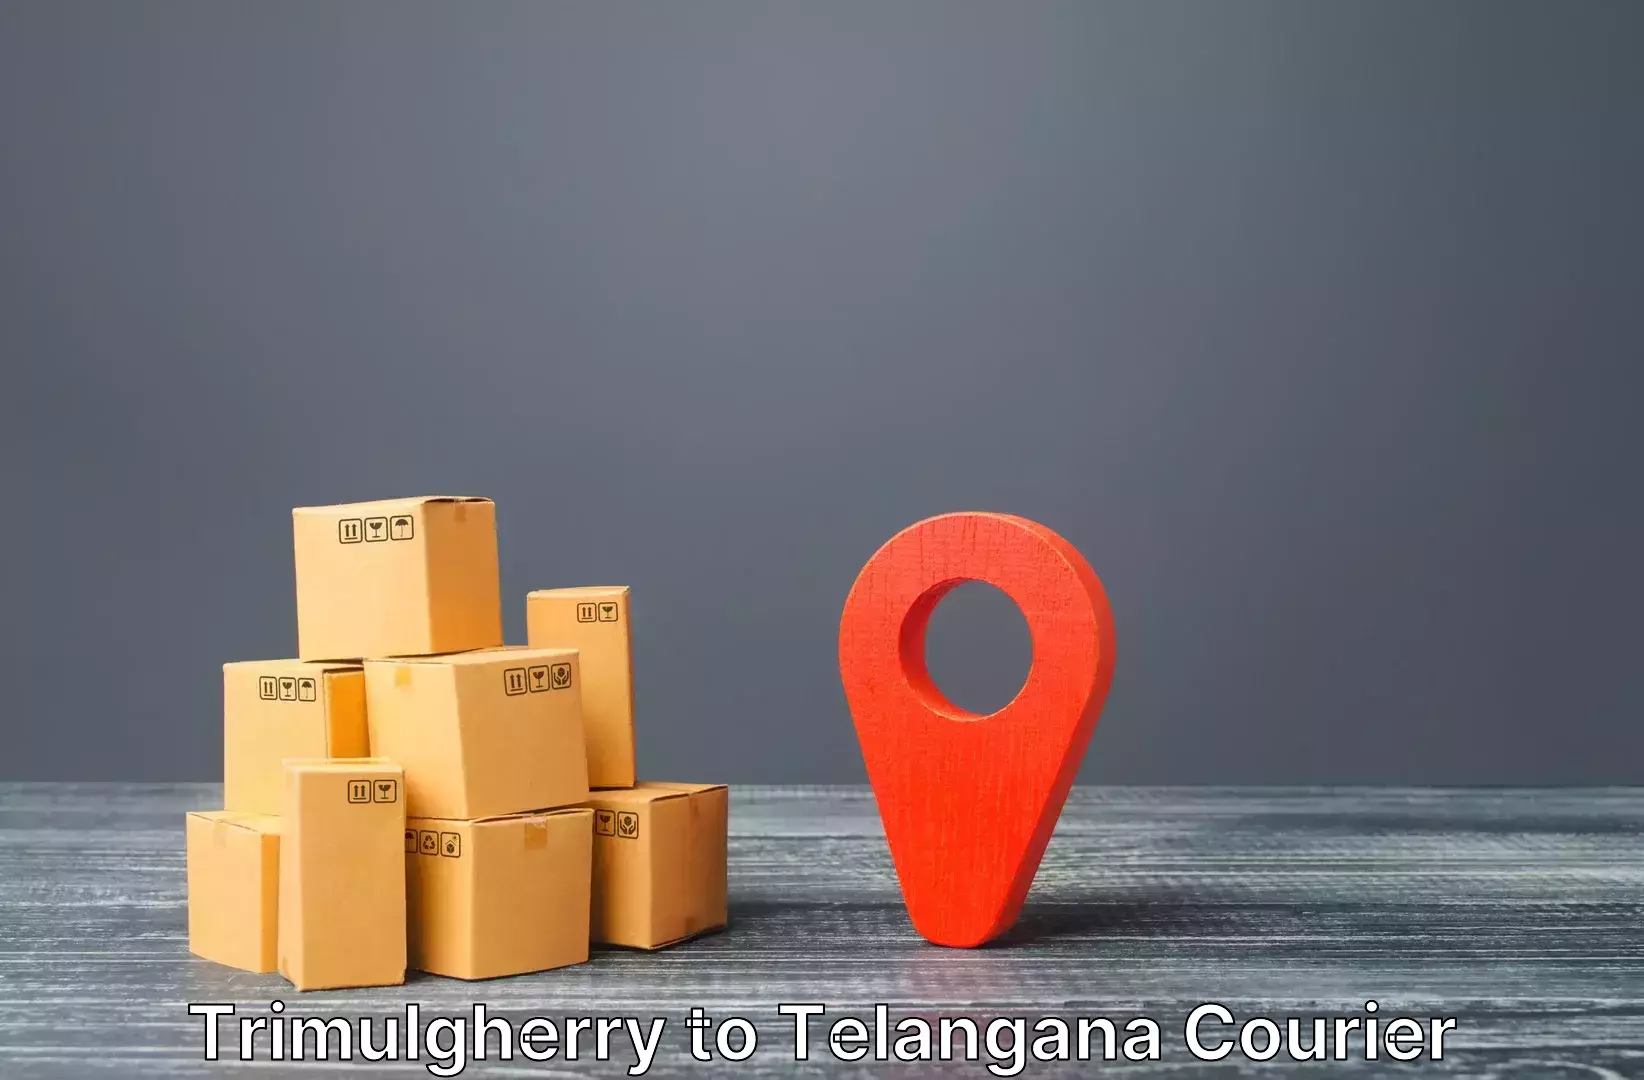 Excess baggage transport in Trimulgherry to Manthani